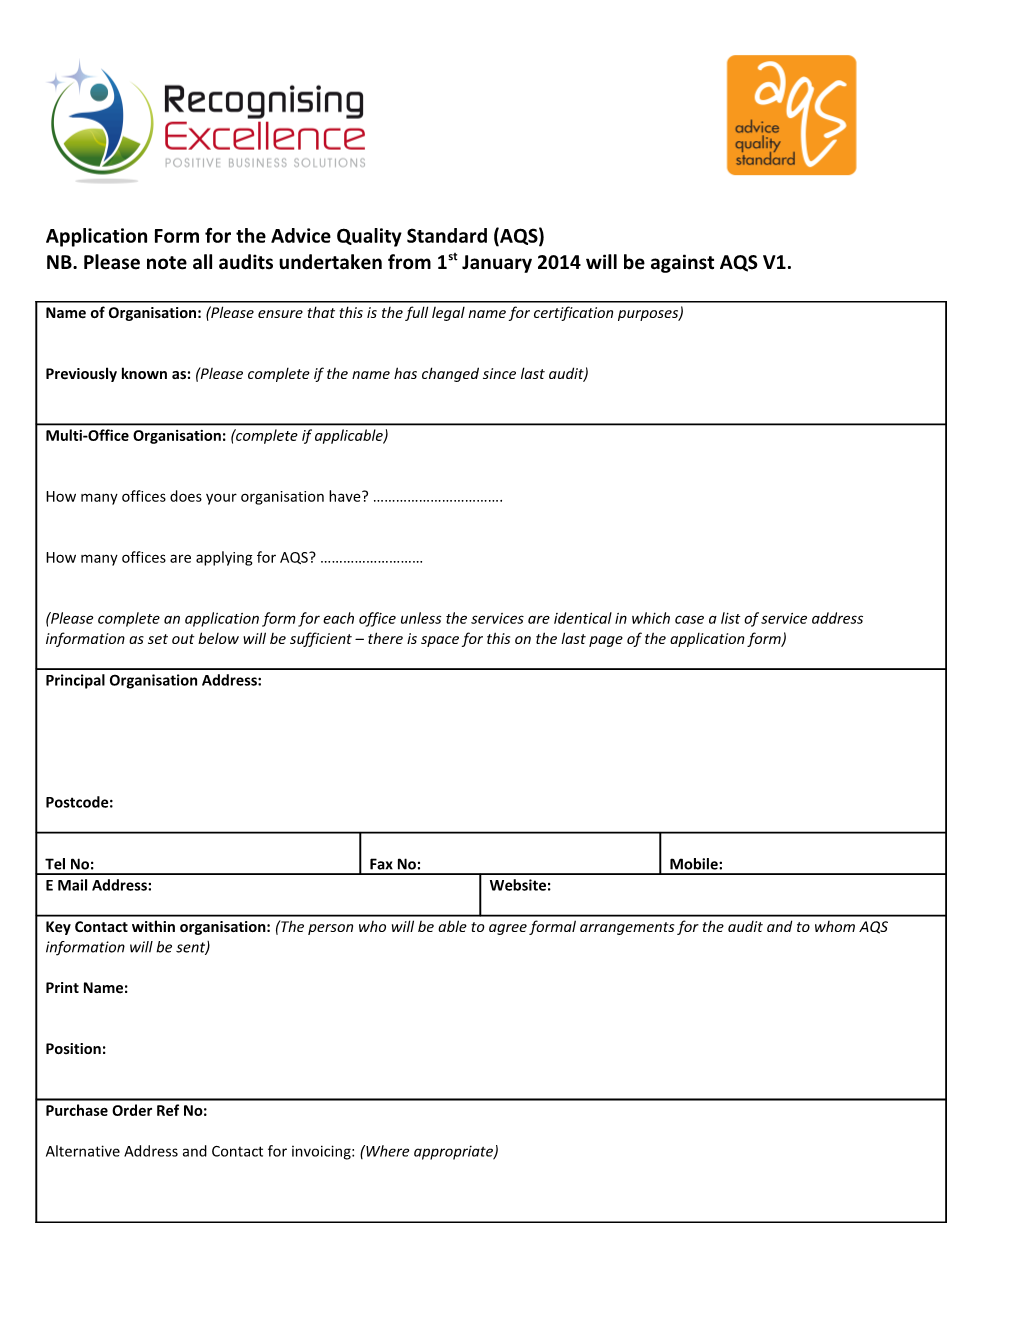 Application Form for the Advice Quality Standard (AQS)